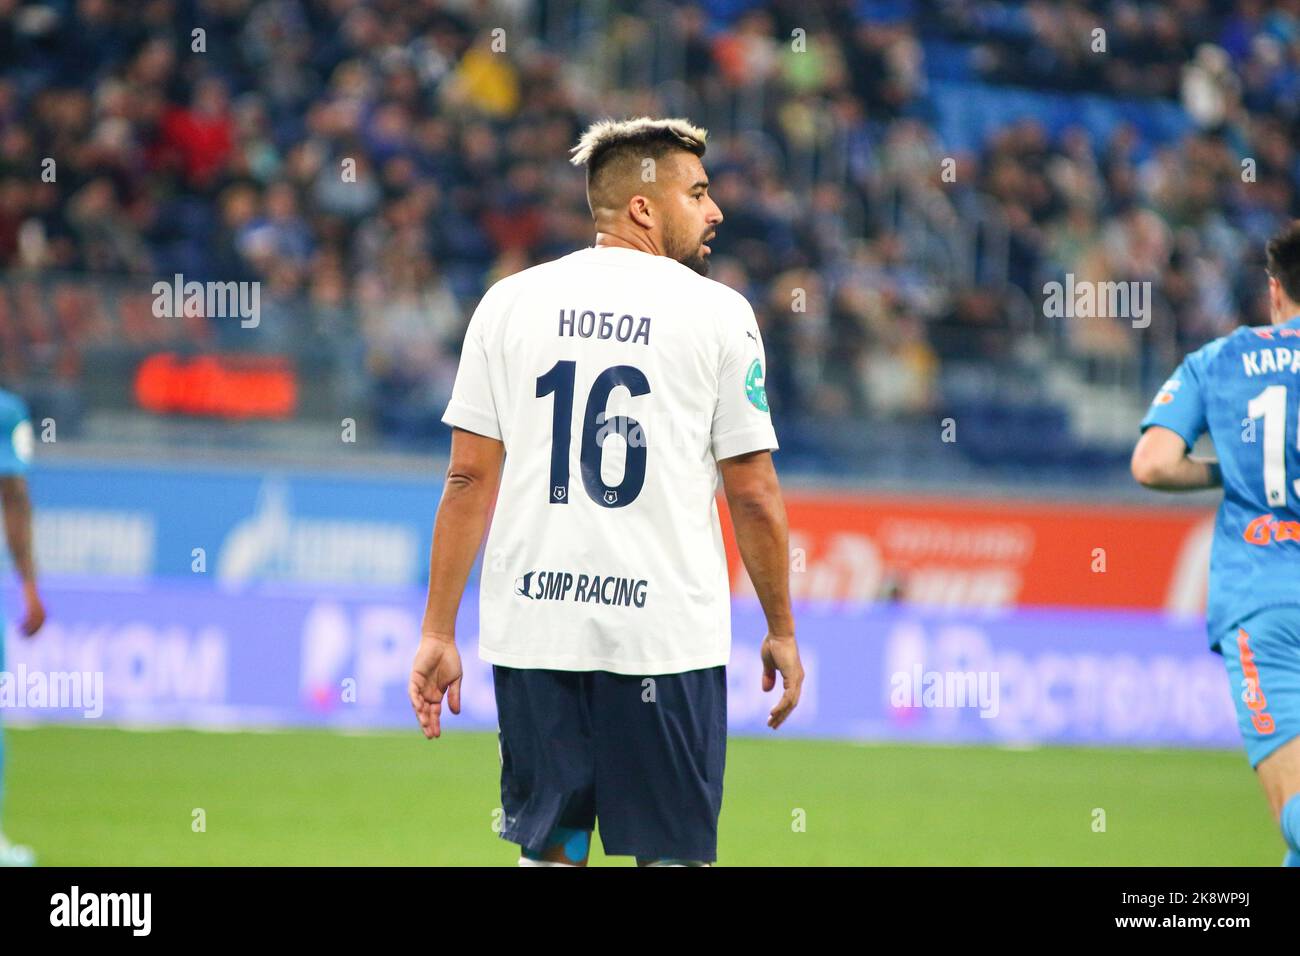 Saint Petersburg, Russia. 24th Oct, 2022. Christian Noboa (No.16) of Sochi seen in action during the Russian Premier League football match between Zenit Saint Petersburg and Sochi at Gazprom Arena. Final score; Zenit 7:0 Sochi. Credit: SOPA Images Limited/Alamy Live News Stock Photo